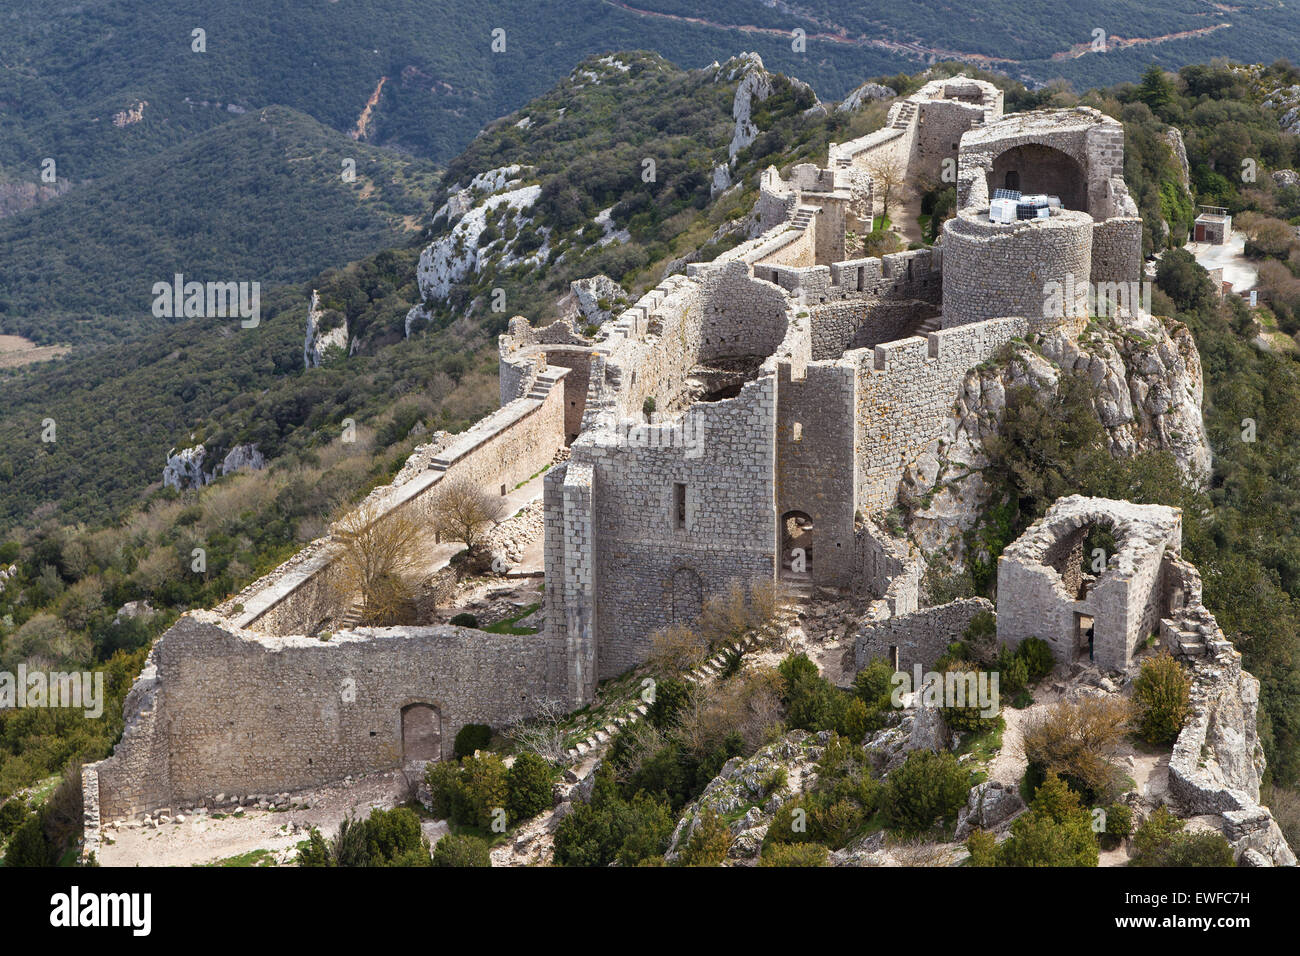 Aerial view of Peyrepertuse Castle in Aude, Languedoc-Roussillon, France. Stock Photo